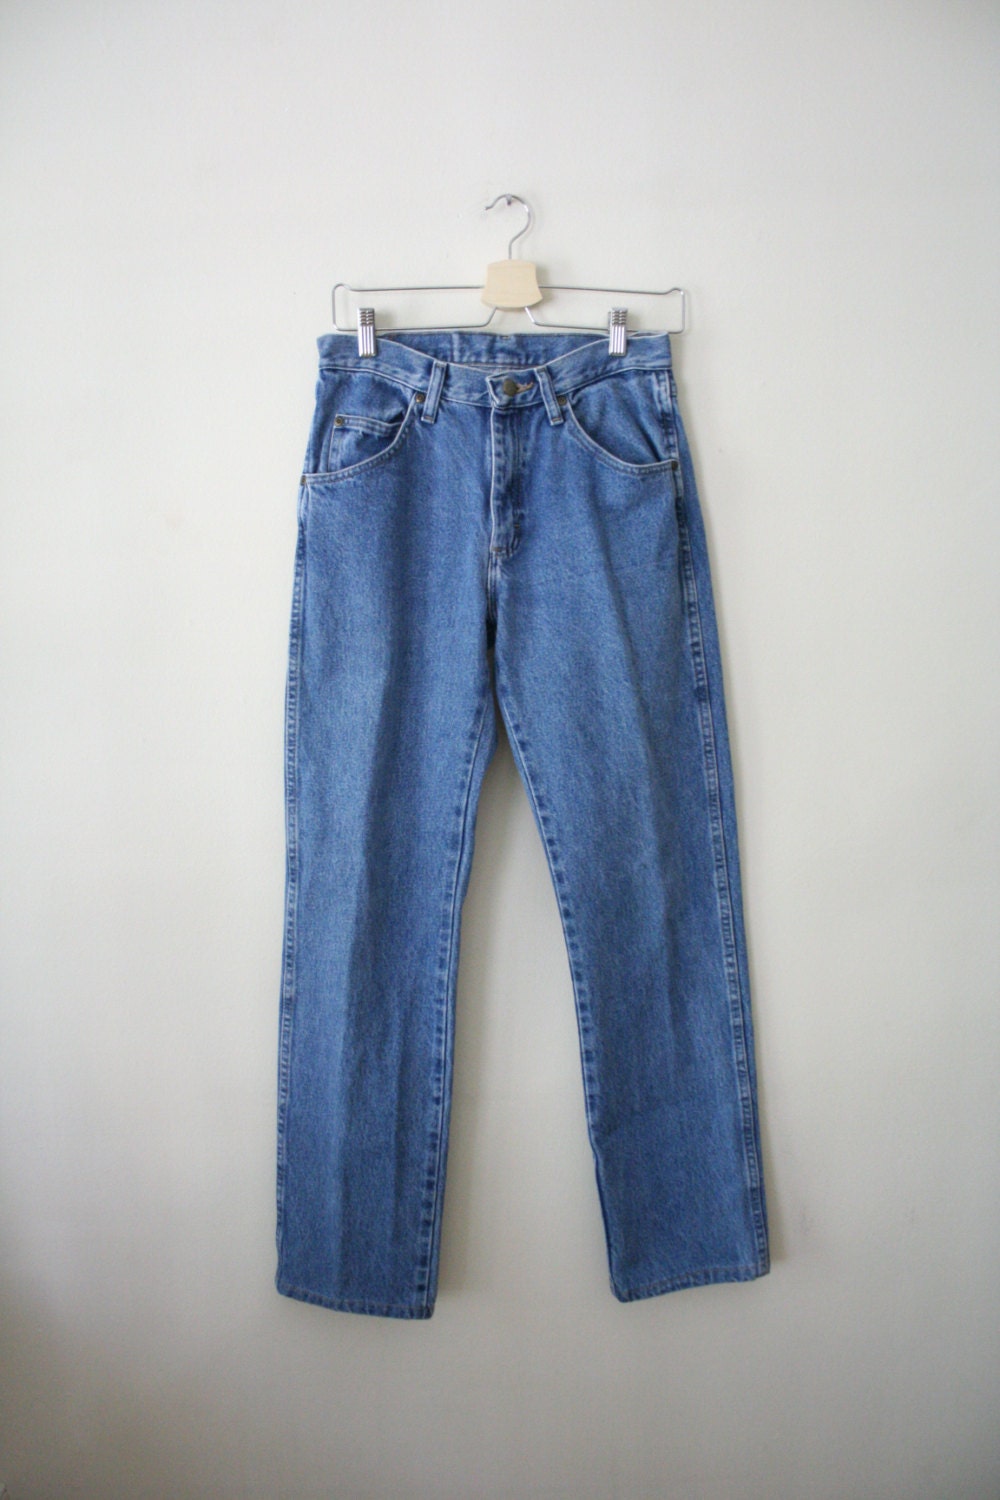 80s Men's Blue Jeans WRANGLERS Straight Leg by DownHouseVintage